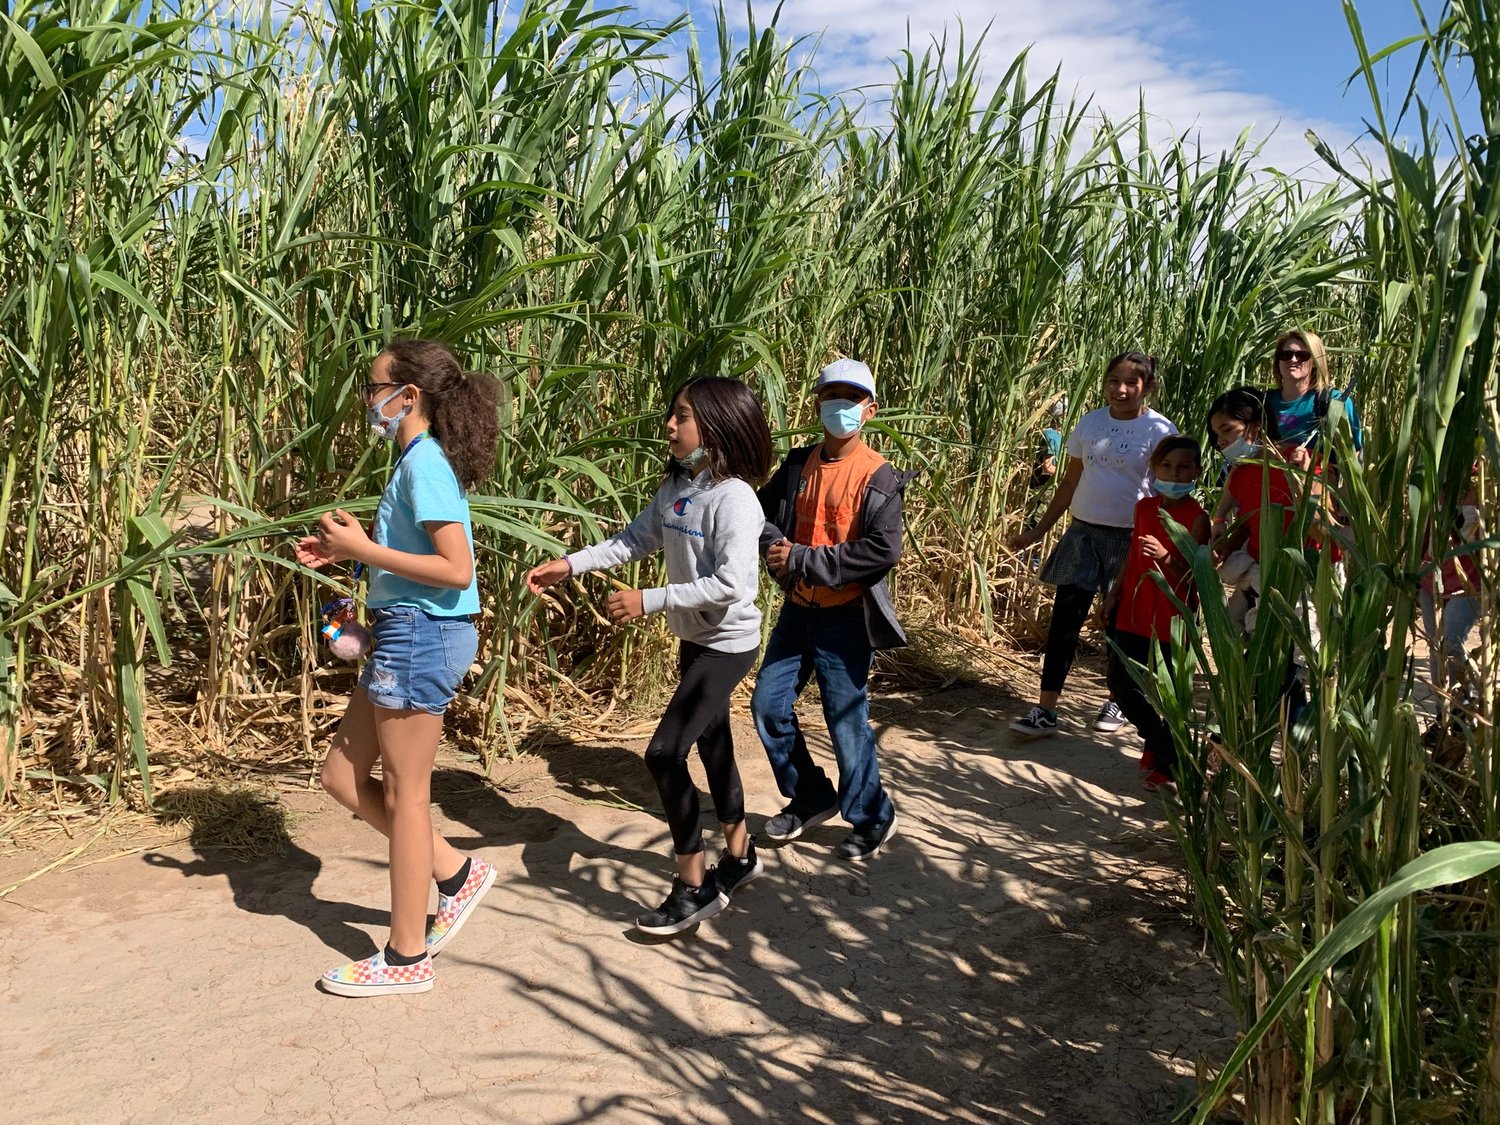 Students visiting La Union Maze from Las Cruces’s Columbia Elementary School make their way through one of two corn mazes created at the site. The mazes are planned before planting and the corn trained around the pathways.